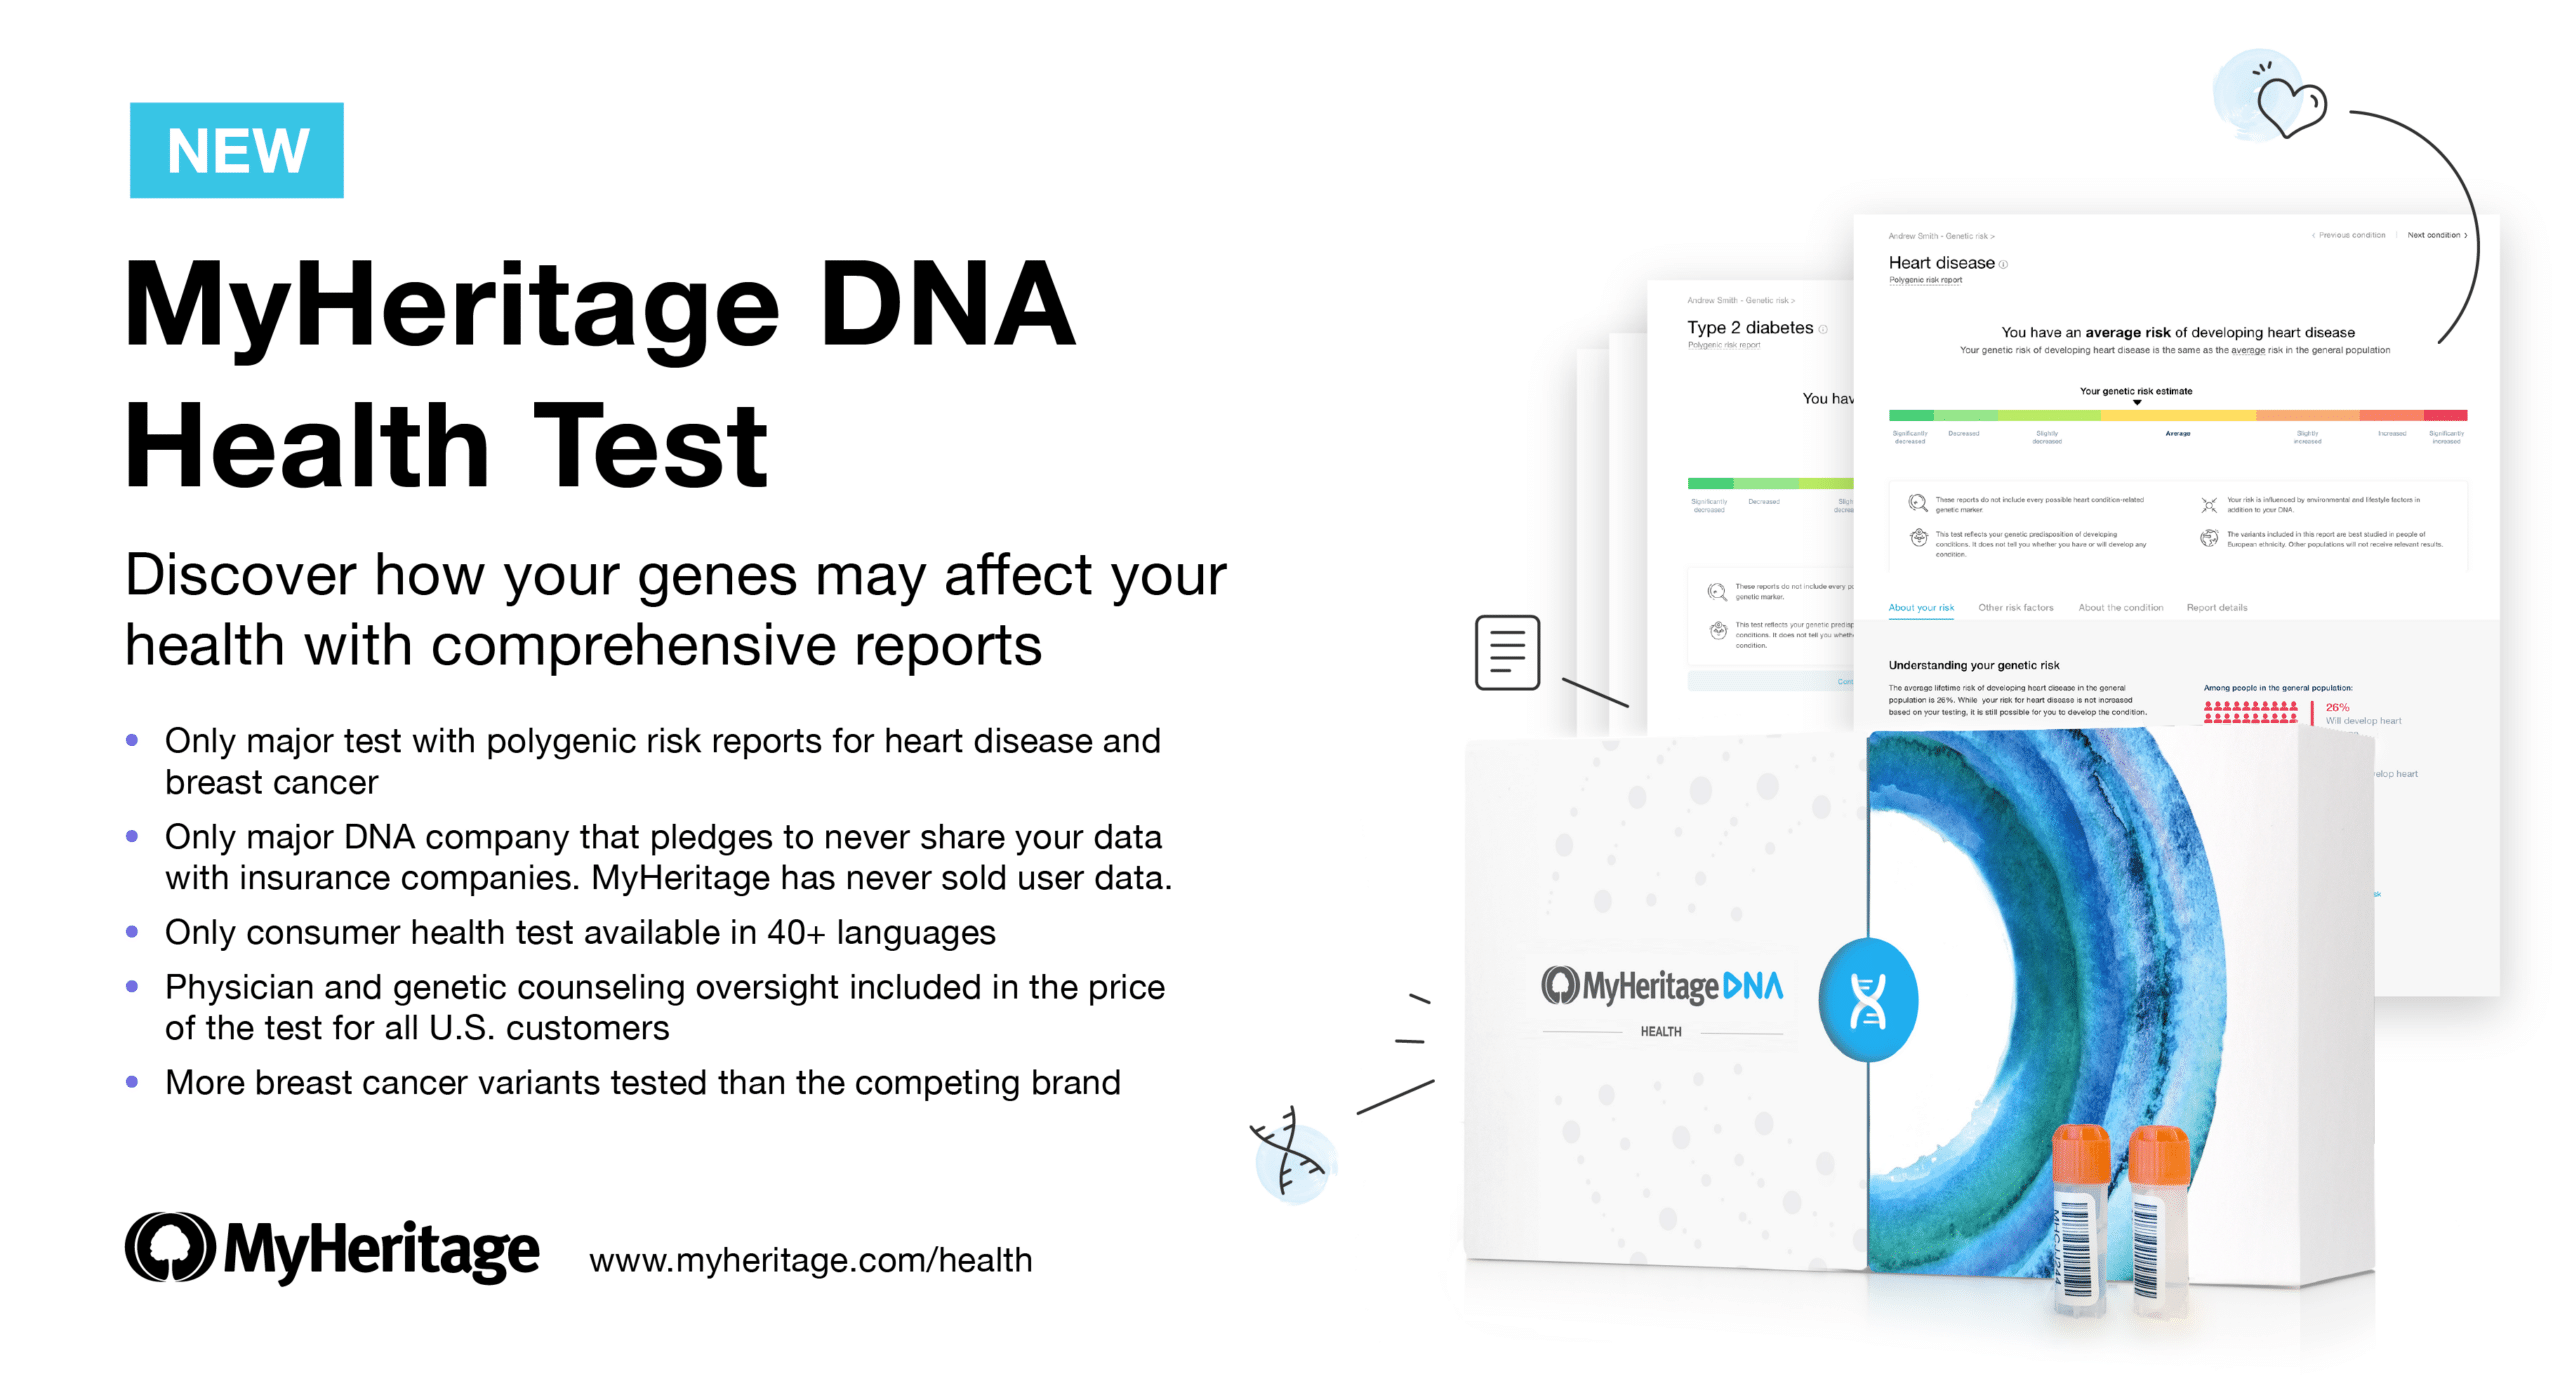 Introducing the MyHeritage DNA Health Test